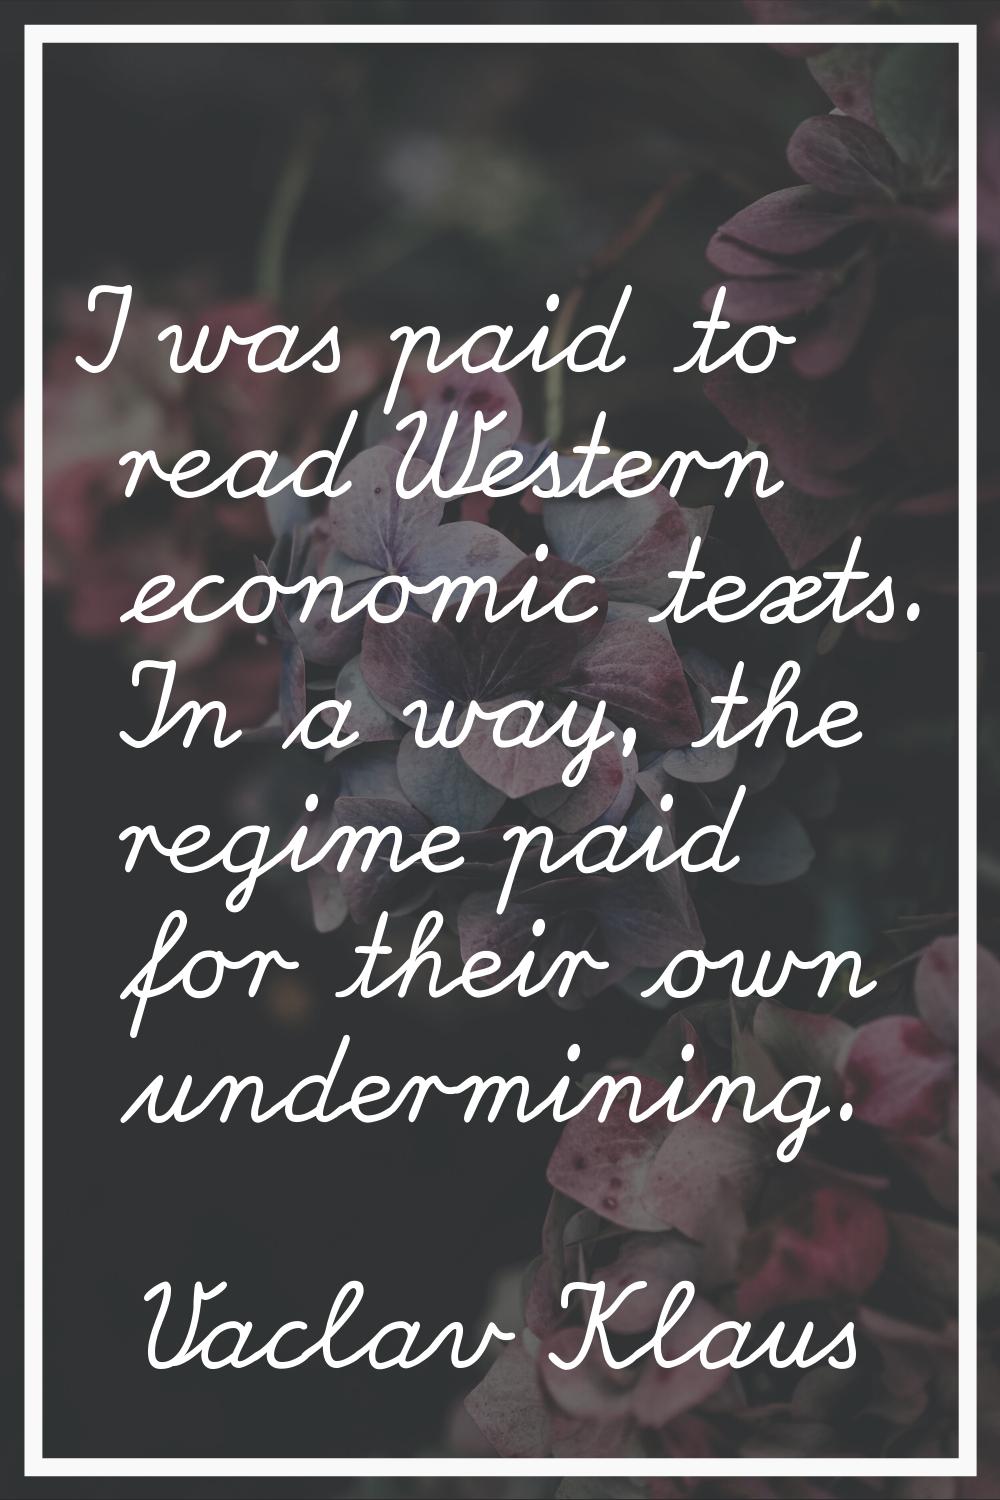 I was paid to read Western economic texts. In a way, the regime paid for their own undermining.